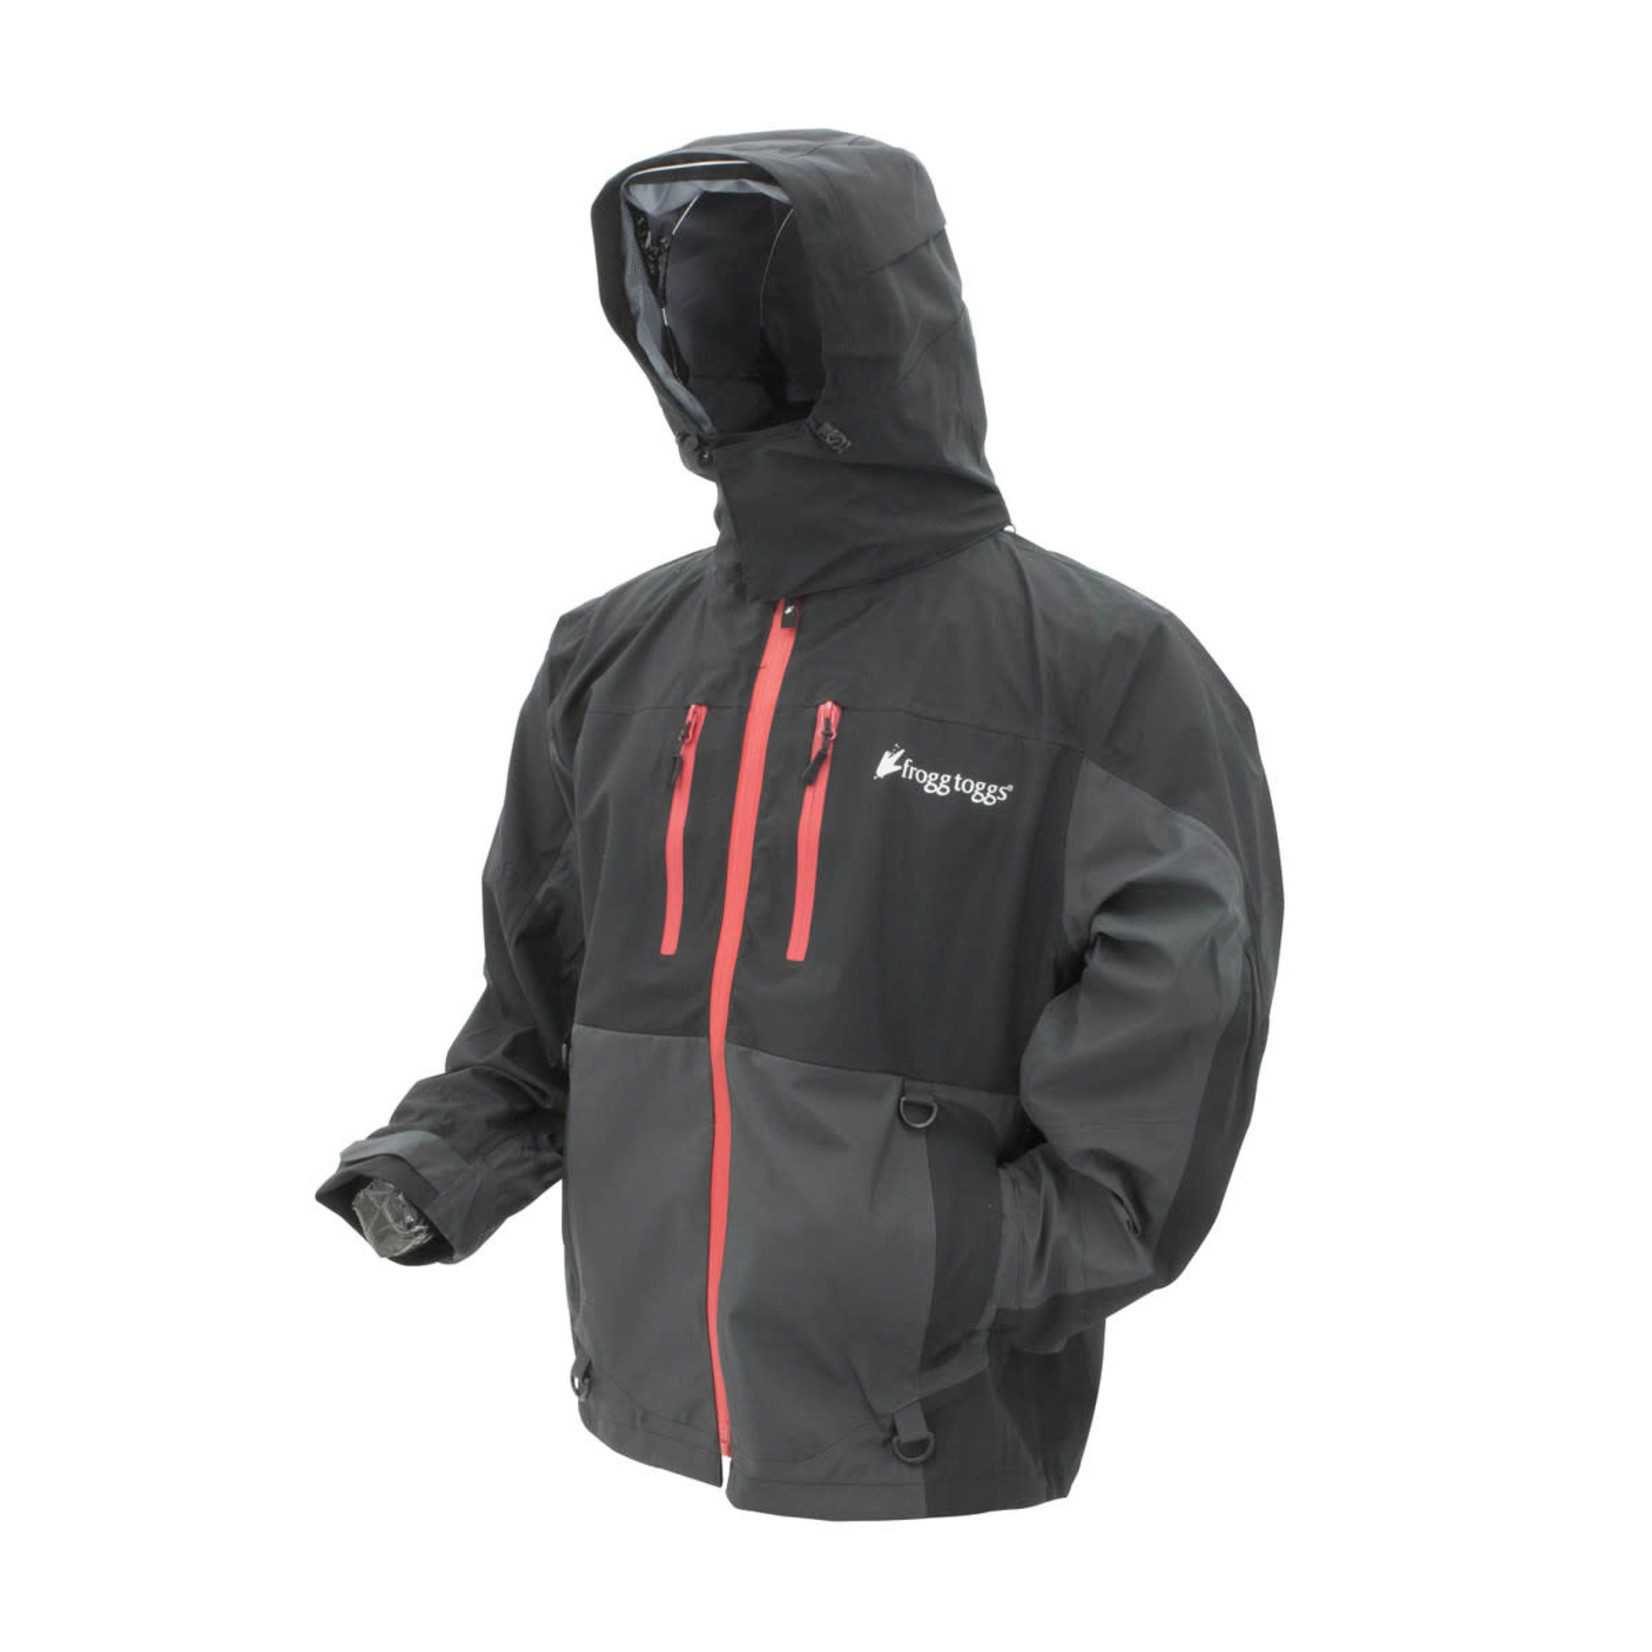 Frog Toggs Frogg Toggs Pilot II Guide Jacket